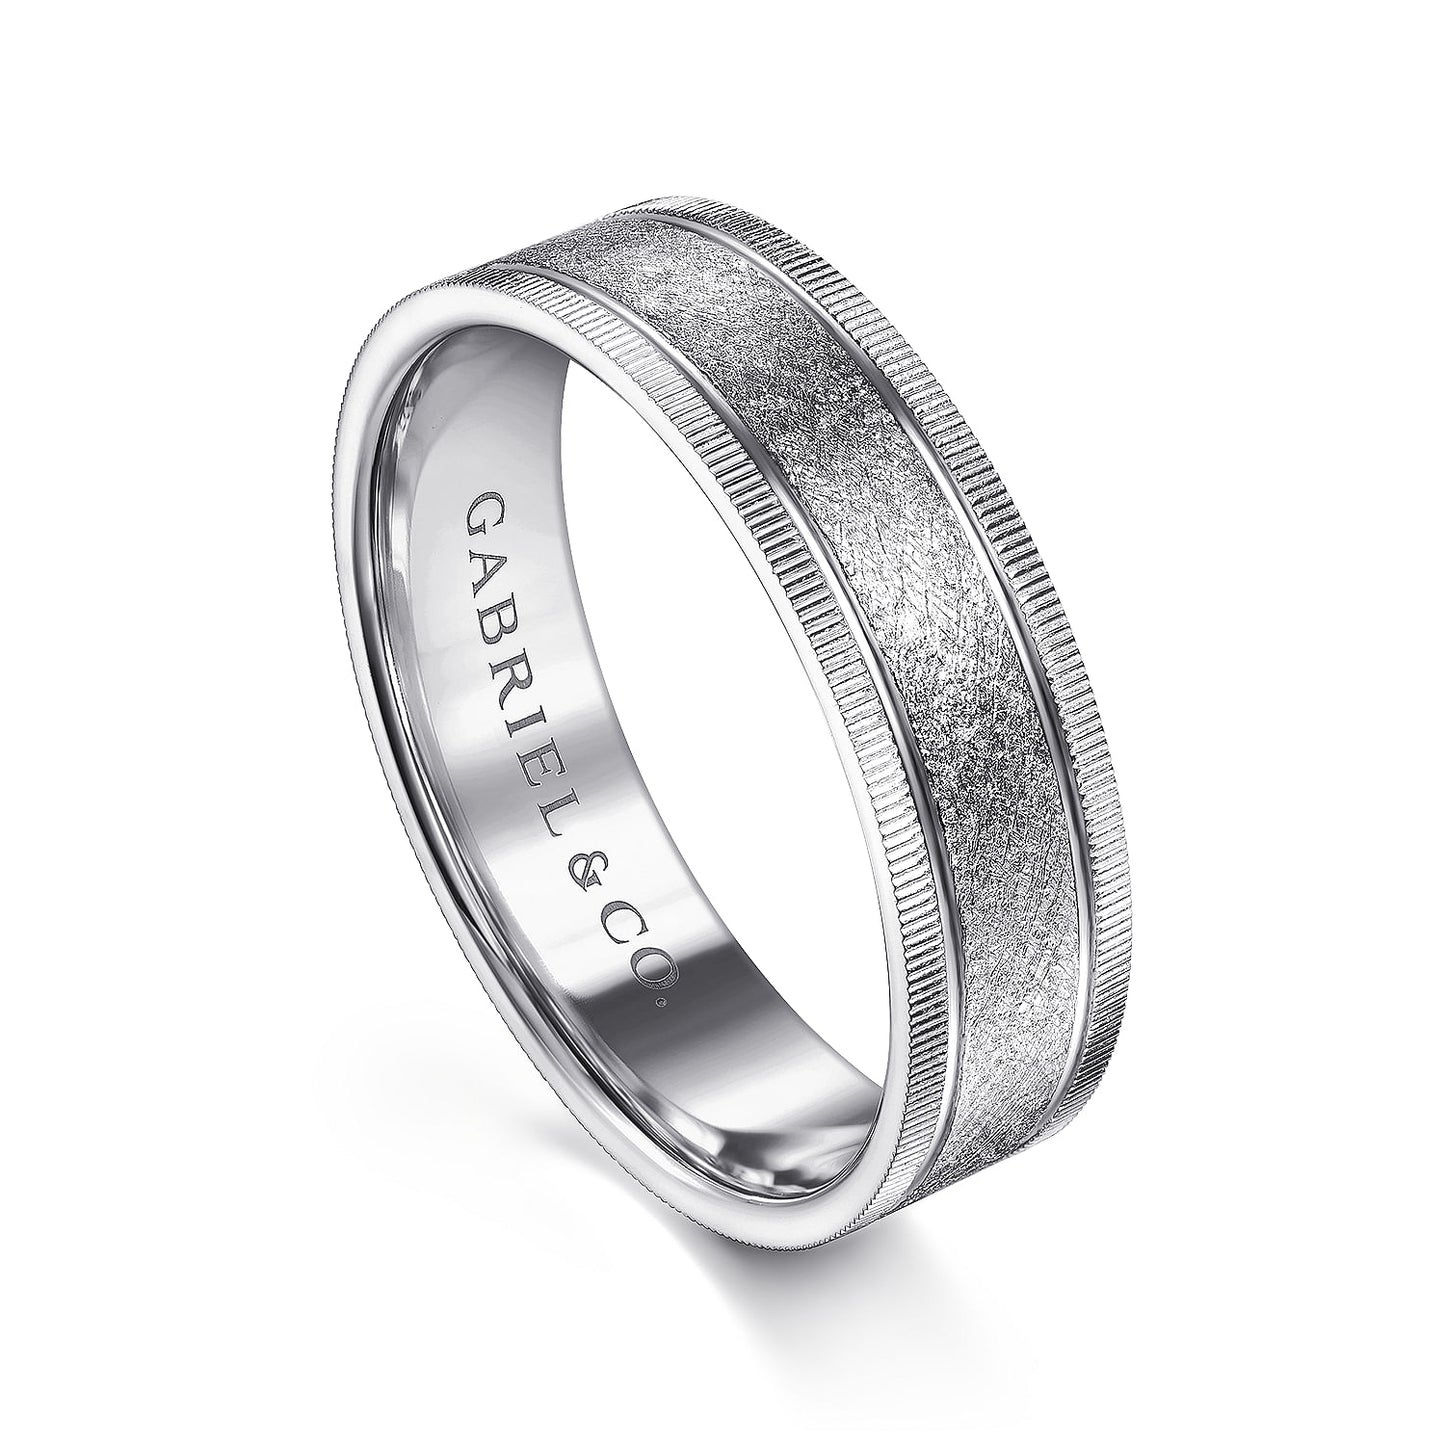 Gabriel & Co White Gold Wedding Band With A Sandblasted Center And Diamond Cut Edges - Gold Wedding Bands - Men's